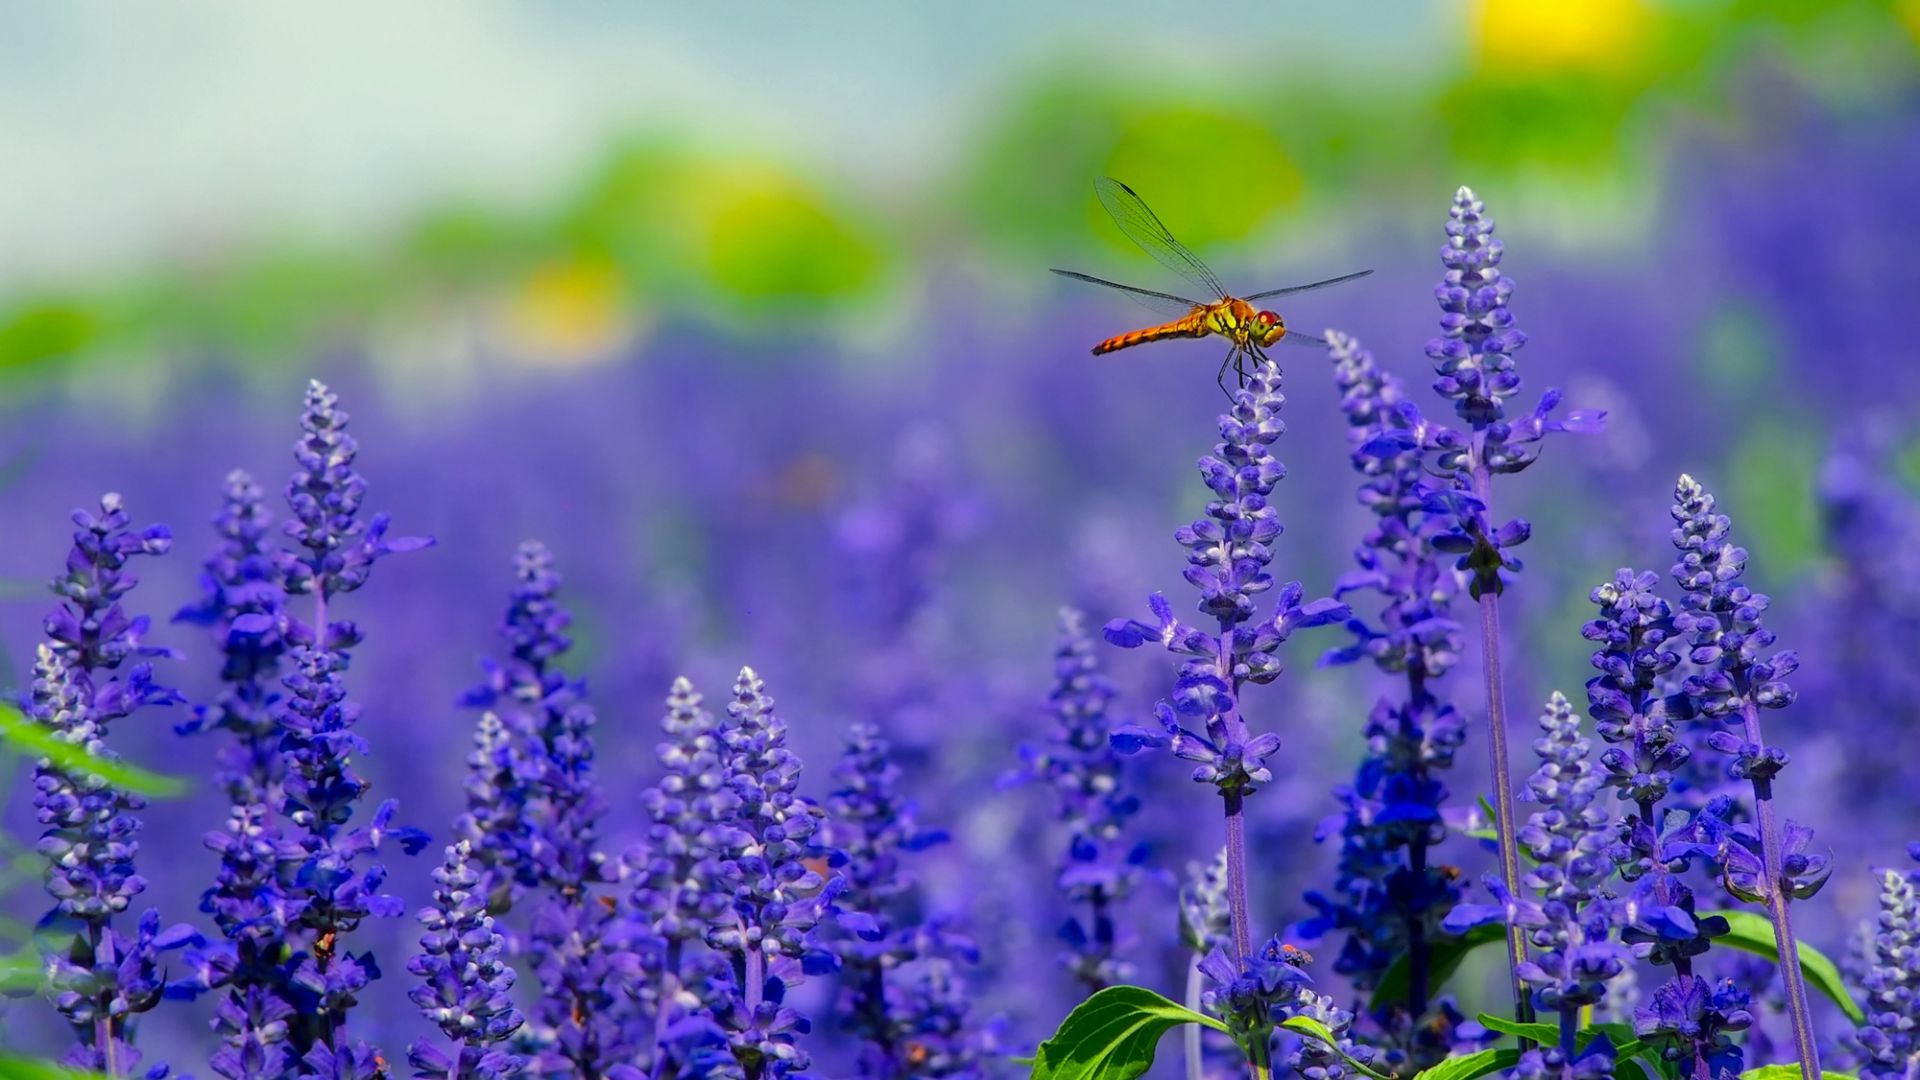 Wallpaper Flowers, plants, dragonfly, insect, purple flowers